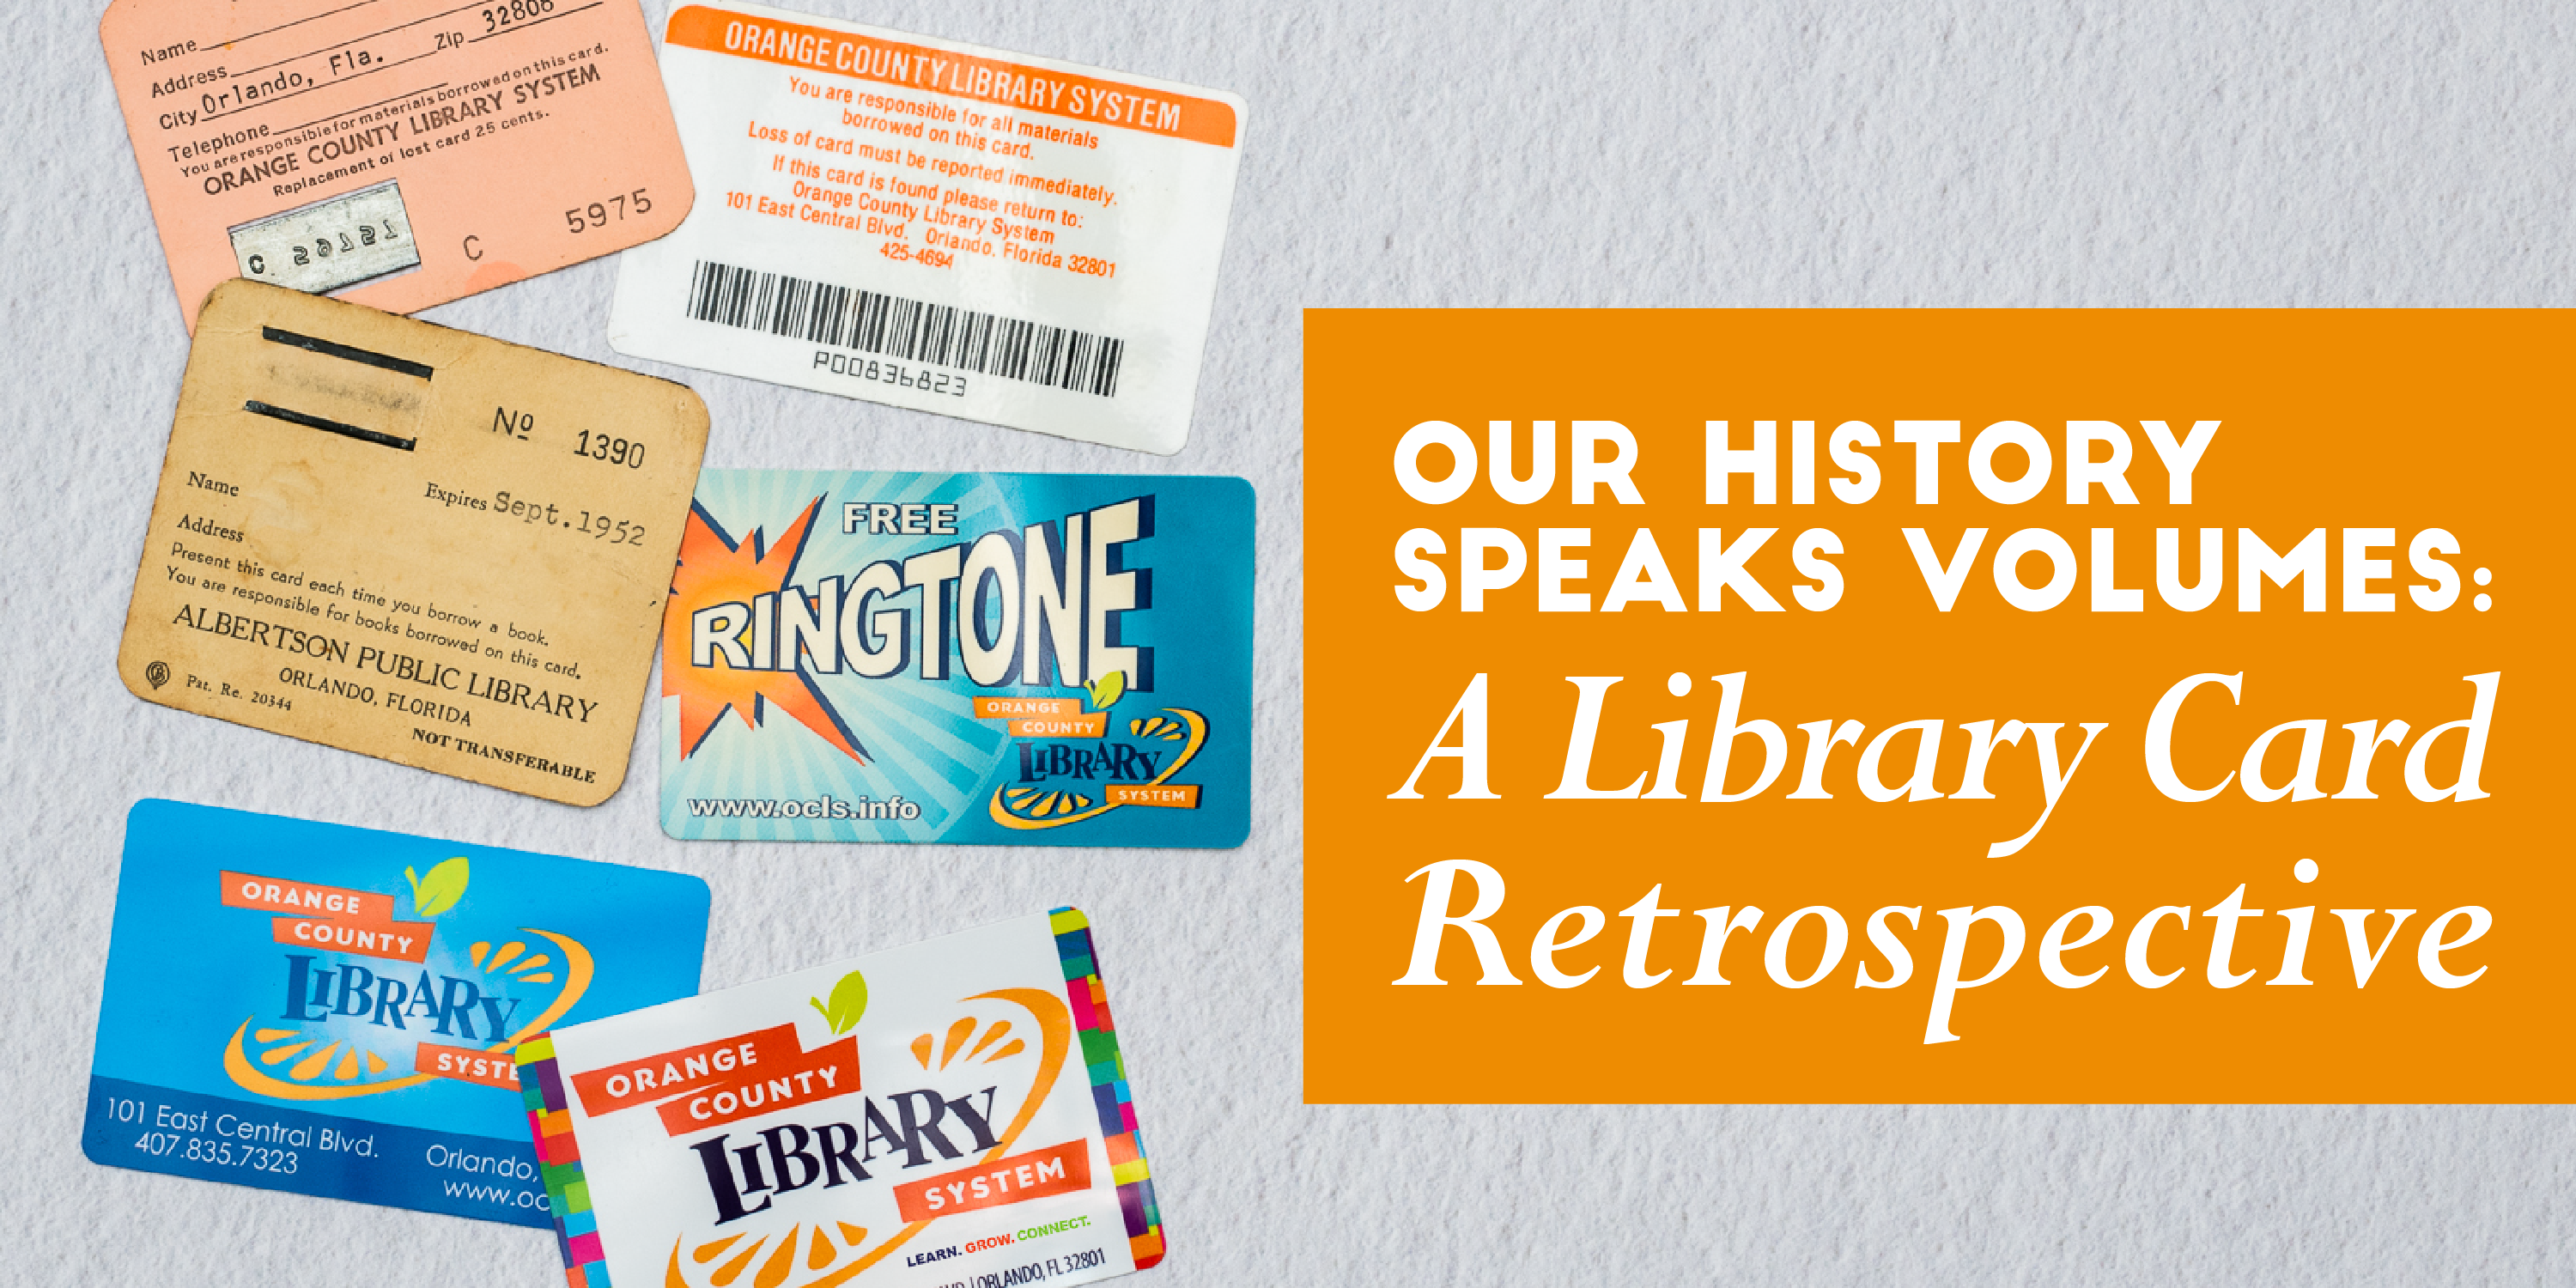 Our History Speaks Volumes: A Library Card Retrospective